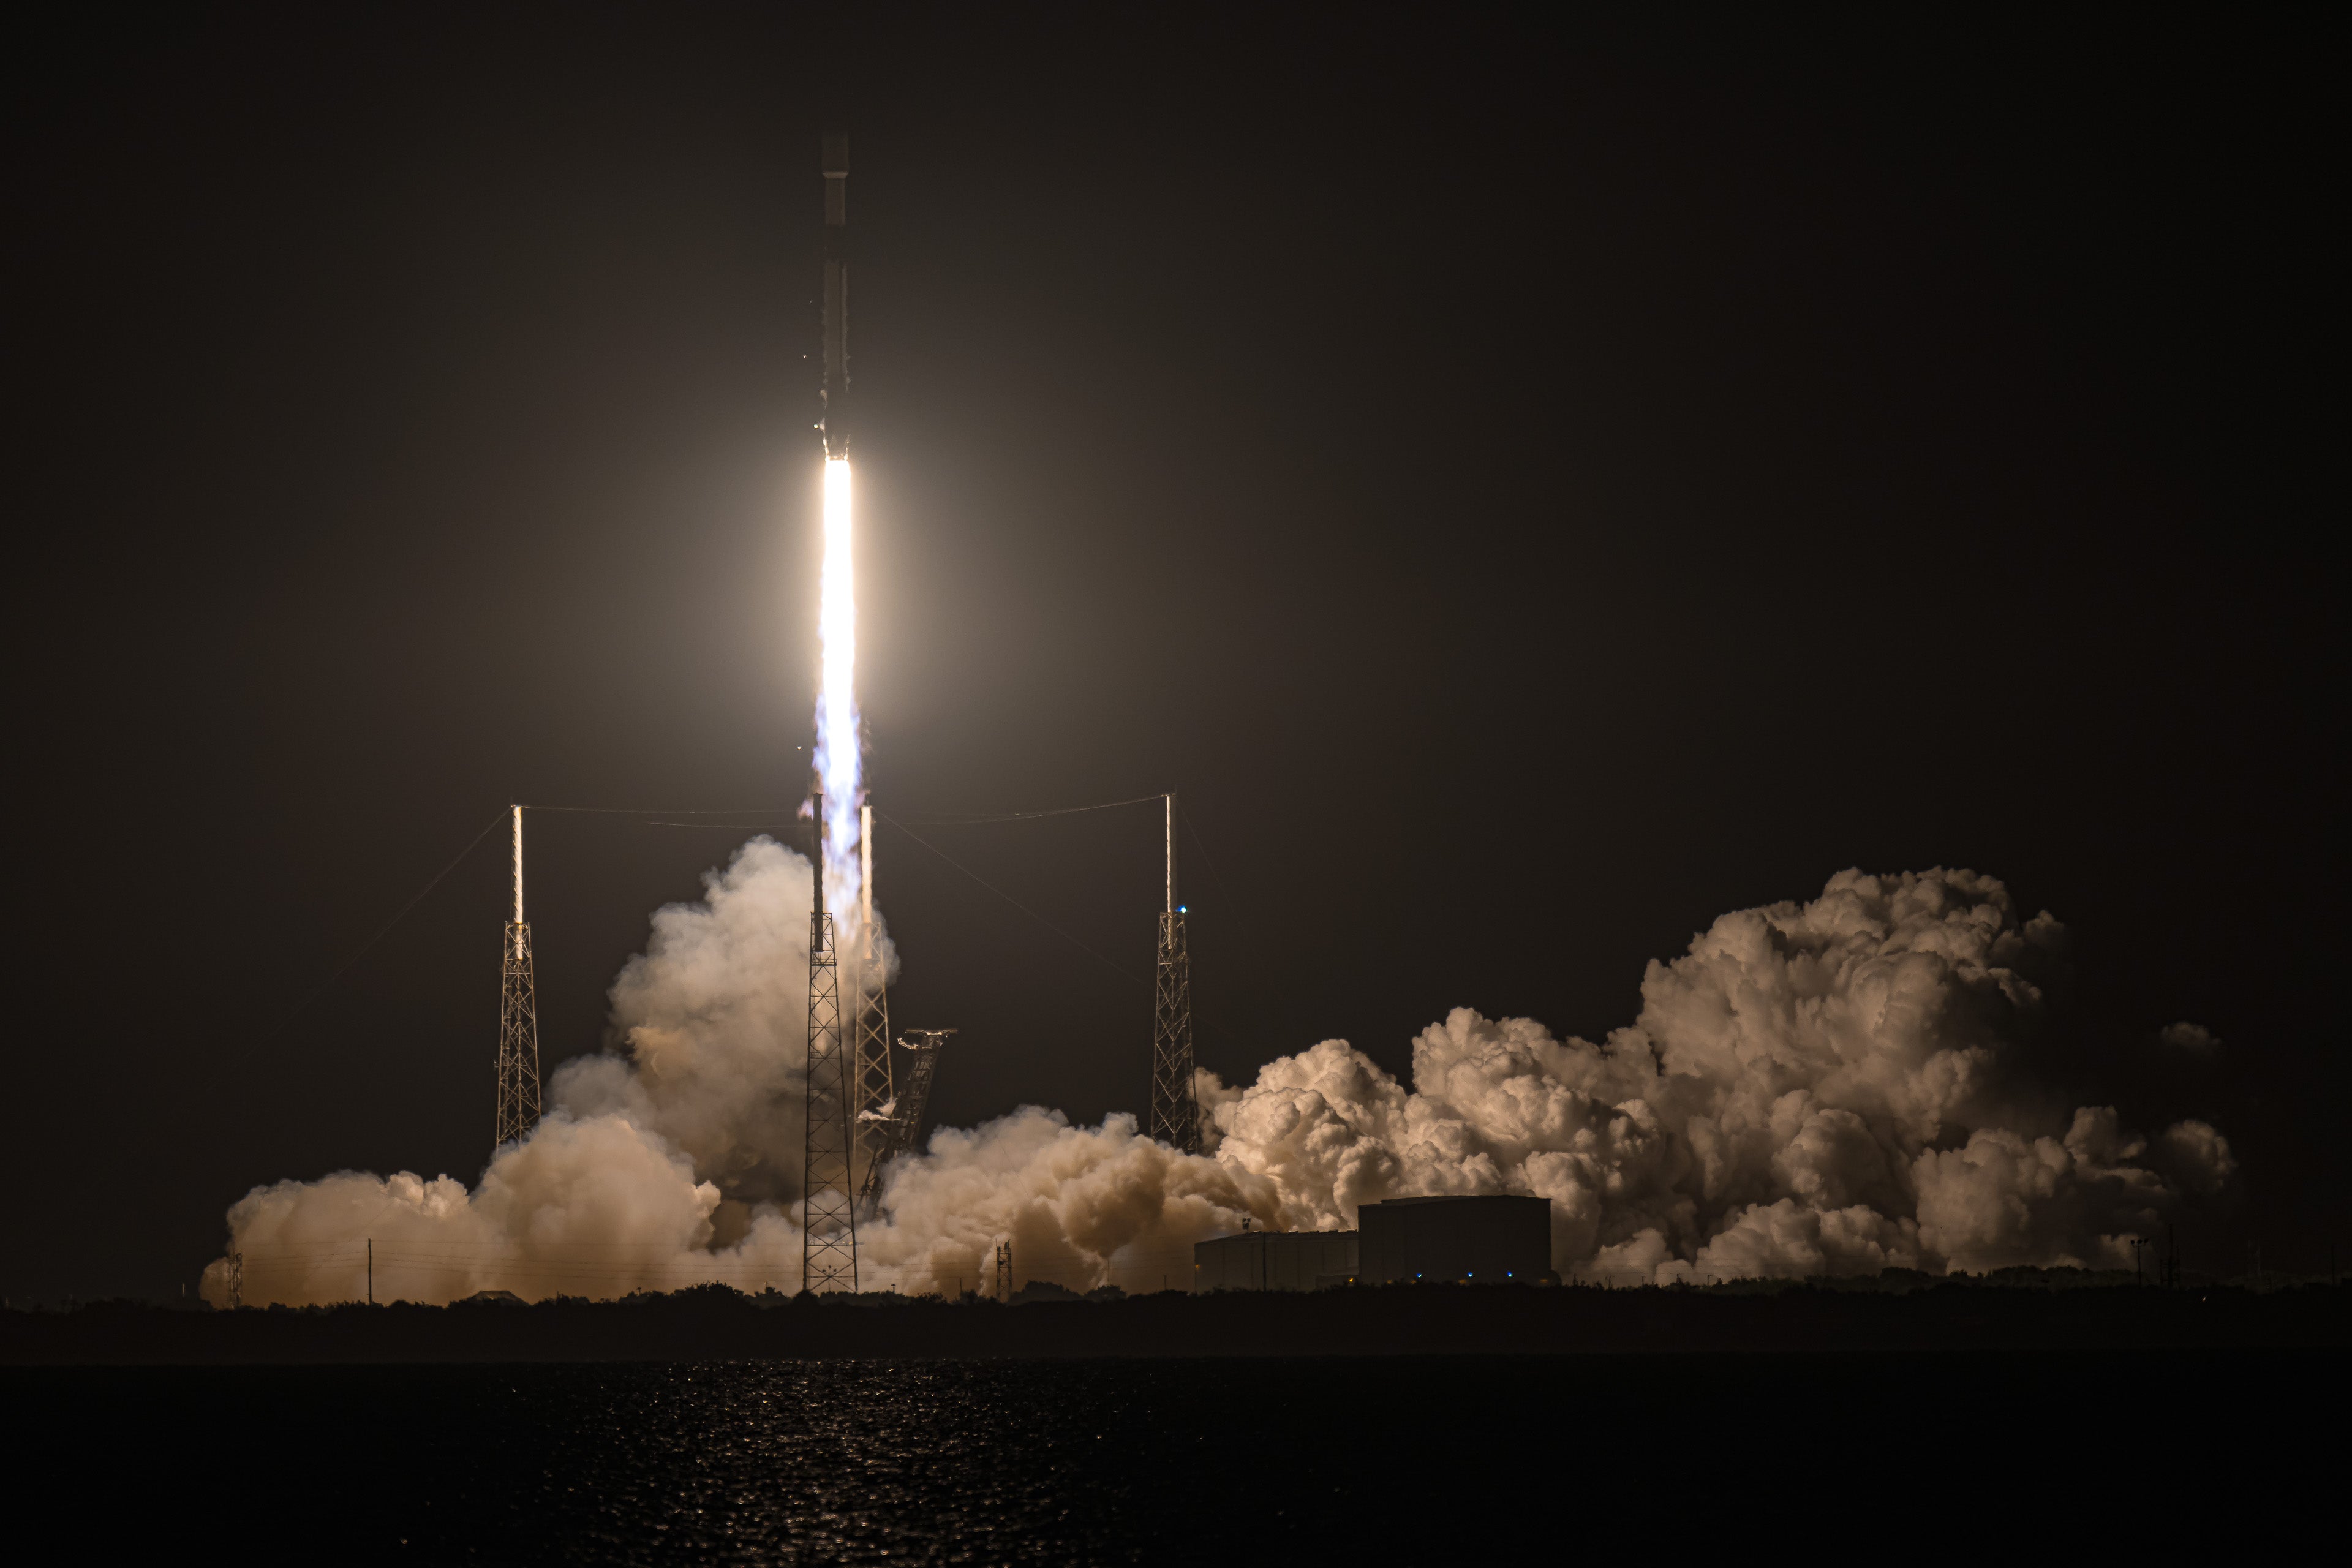 SpaceX reaches a new rocket reusability record as Falcon 9 lifts off a 16th time during Starlink V2 mission